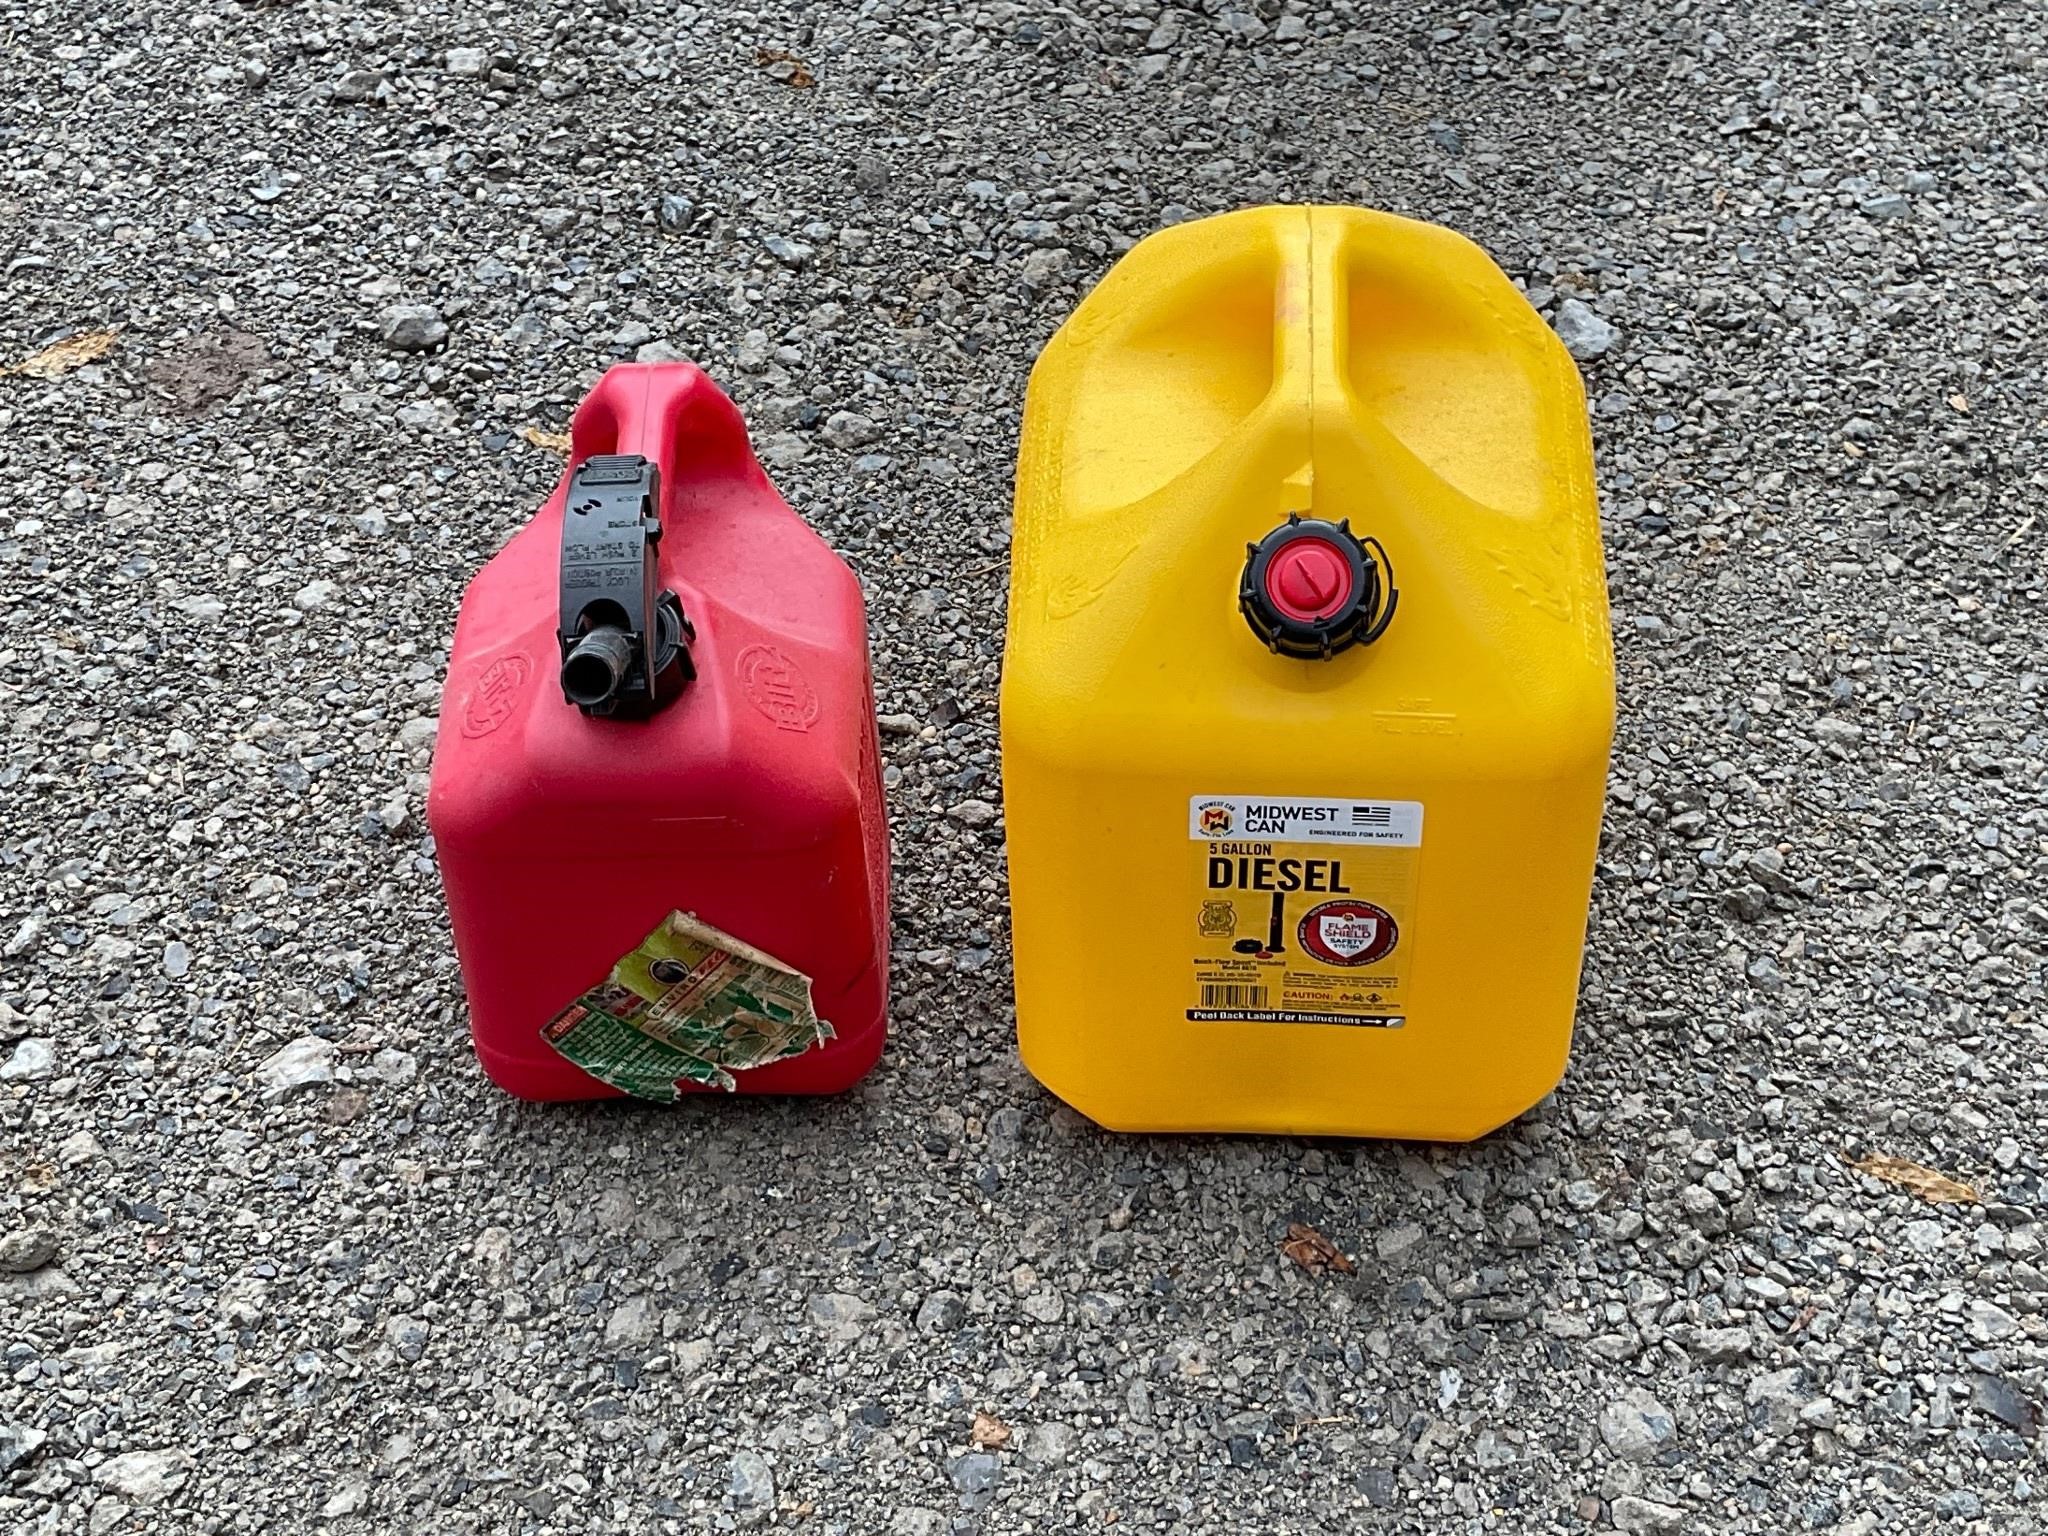 Gas can and diesel can